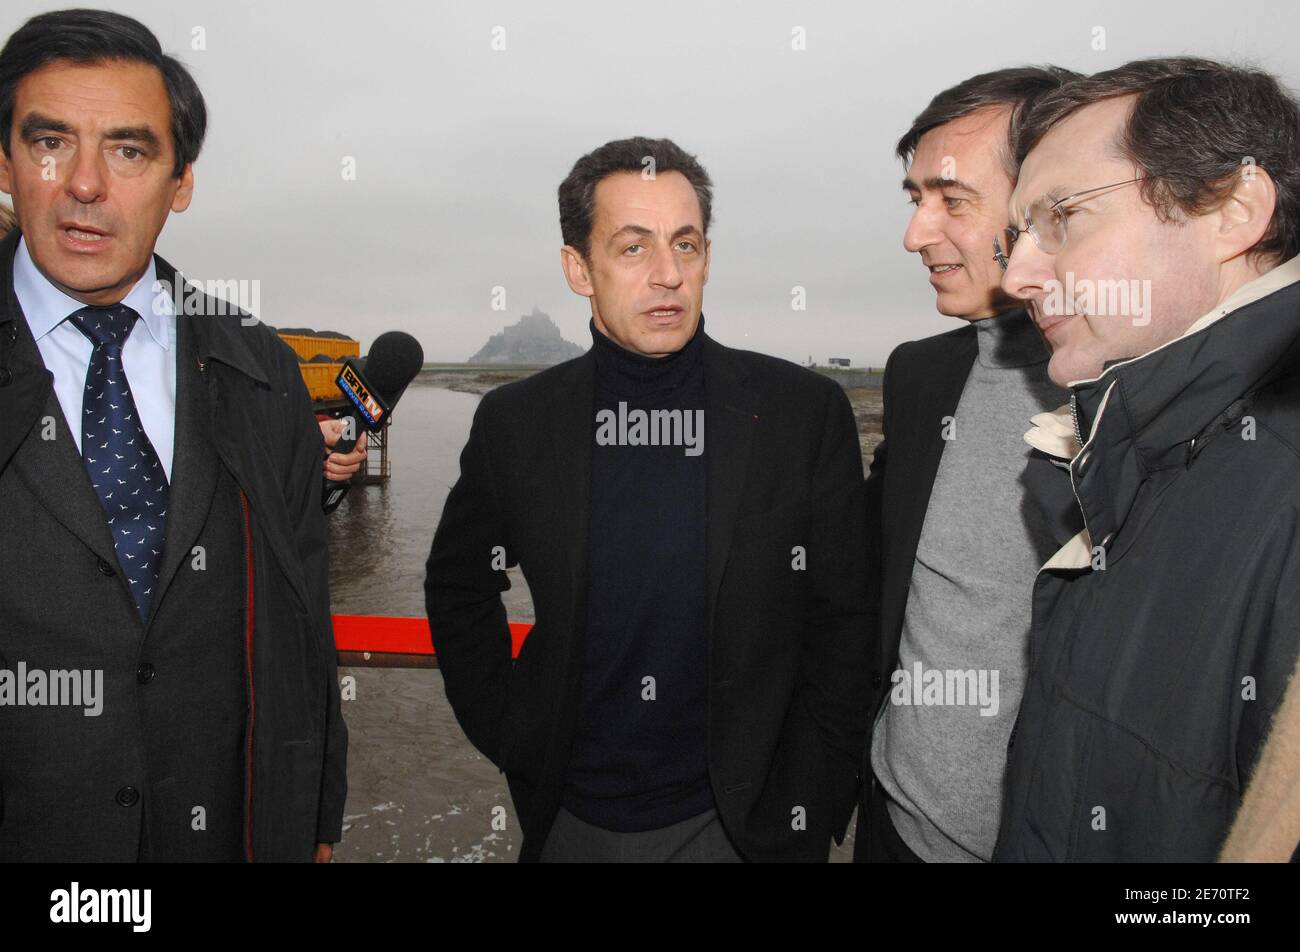 French Interior minister Nicolas Sarkozy, freshly appointed as the right's candidate in April's French presidential election, accompanied by political advisor Francois Fillon (L), Foreign Affaires minister Philippe Douste-Blazy and Social Security minister Philippe Bas, visit the Mont-Saint-Michel, France, on January 15, 2007. Photo by Christophe Guibbaud/ABACAPRESS.COM Stock Photo